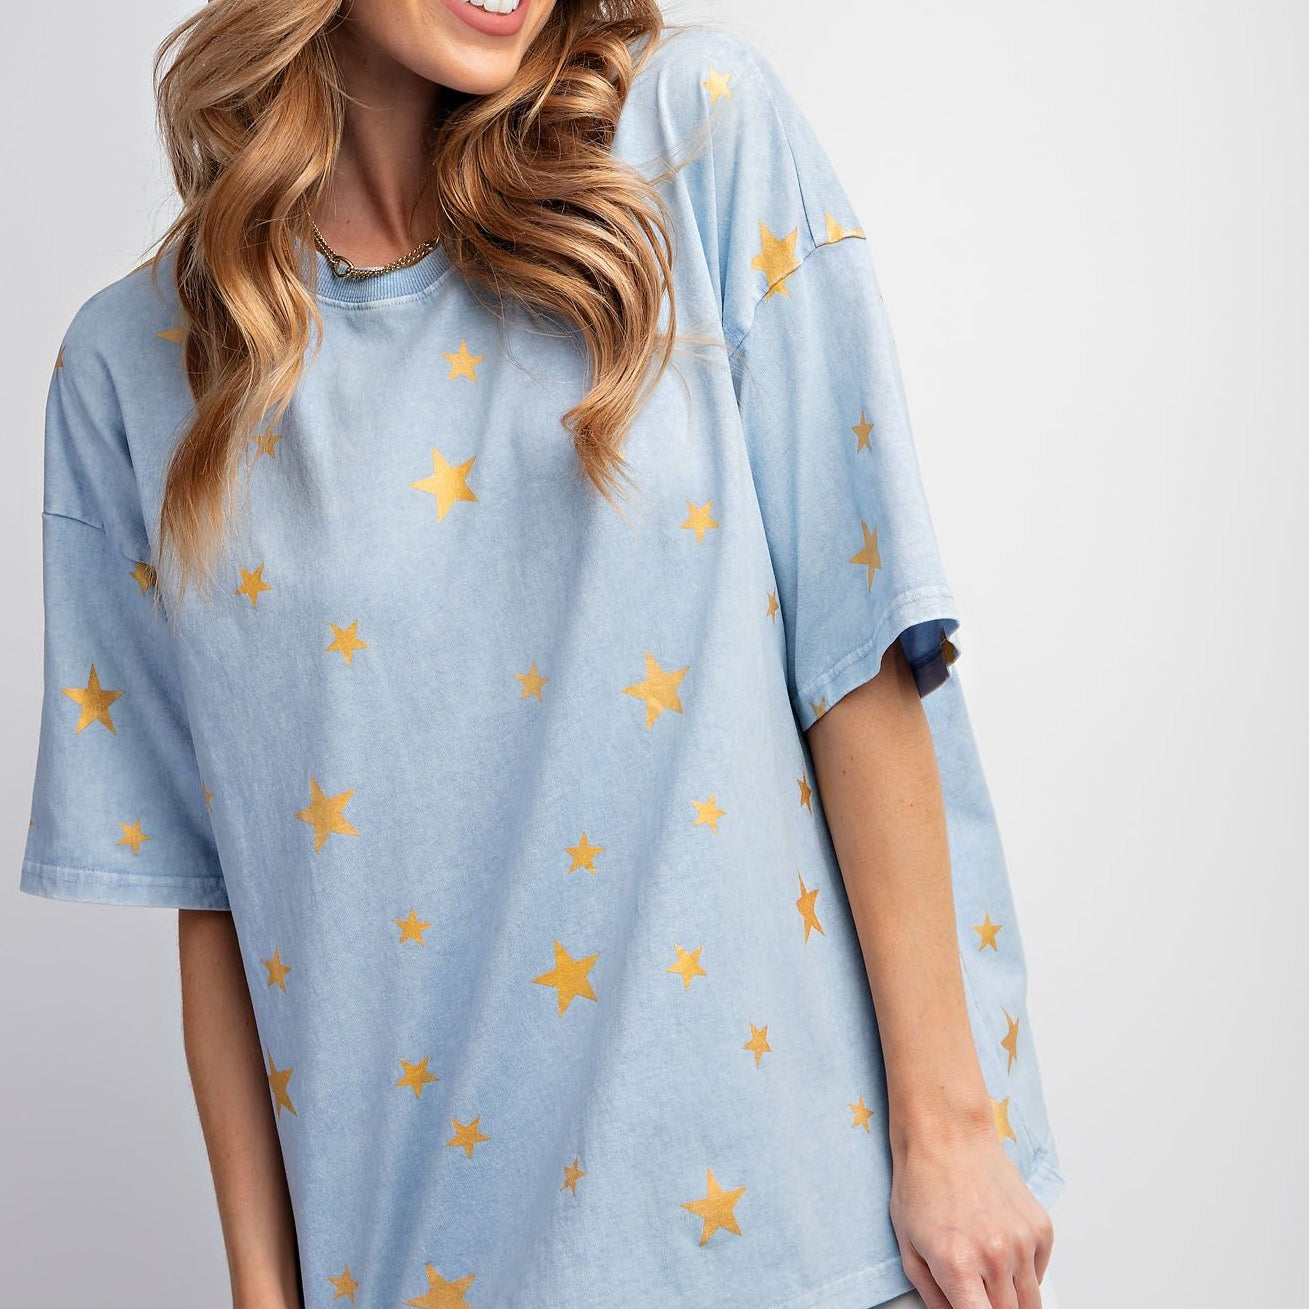 Gold Star Mineral Washed Cotton Knit Top by Easel - Light Peri - Plus/Regular-Apparel-Easel-LouisGeorge Boutique, Women’s Fashion Boutique Located in Trussville, Alabama